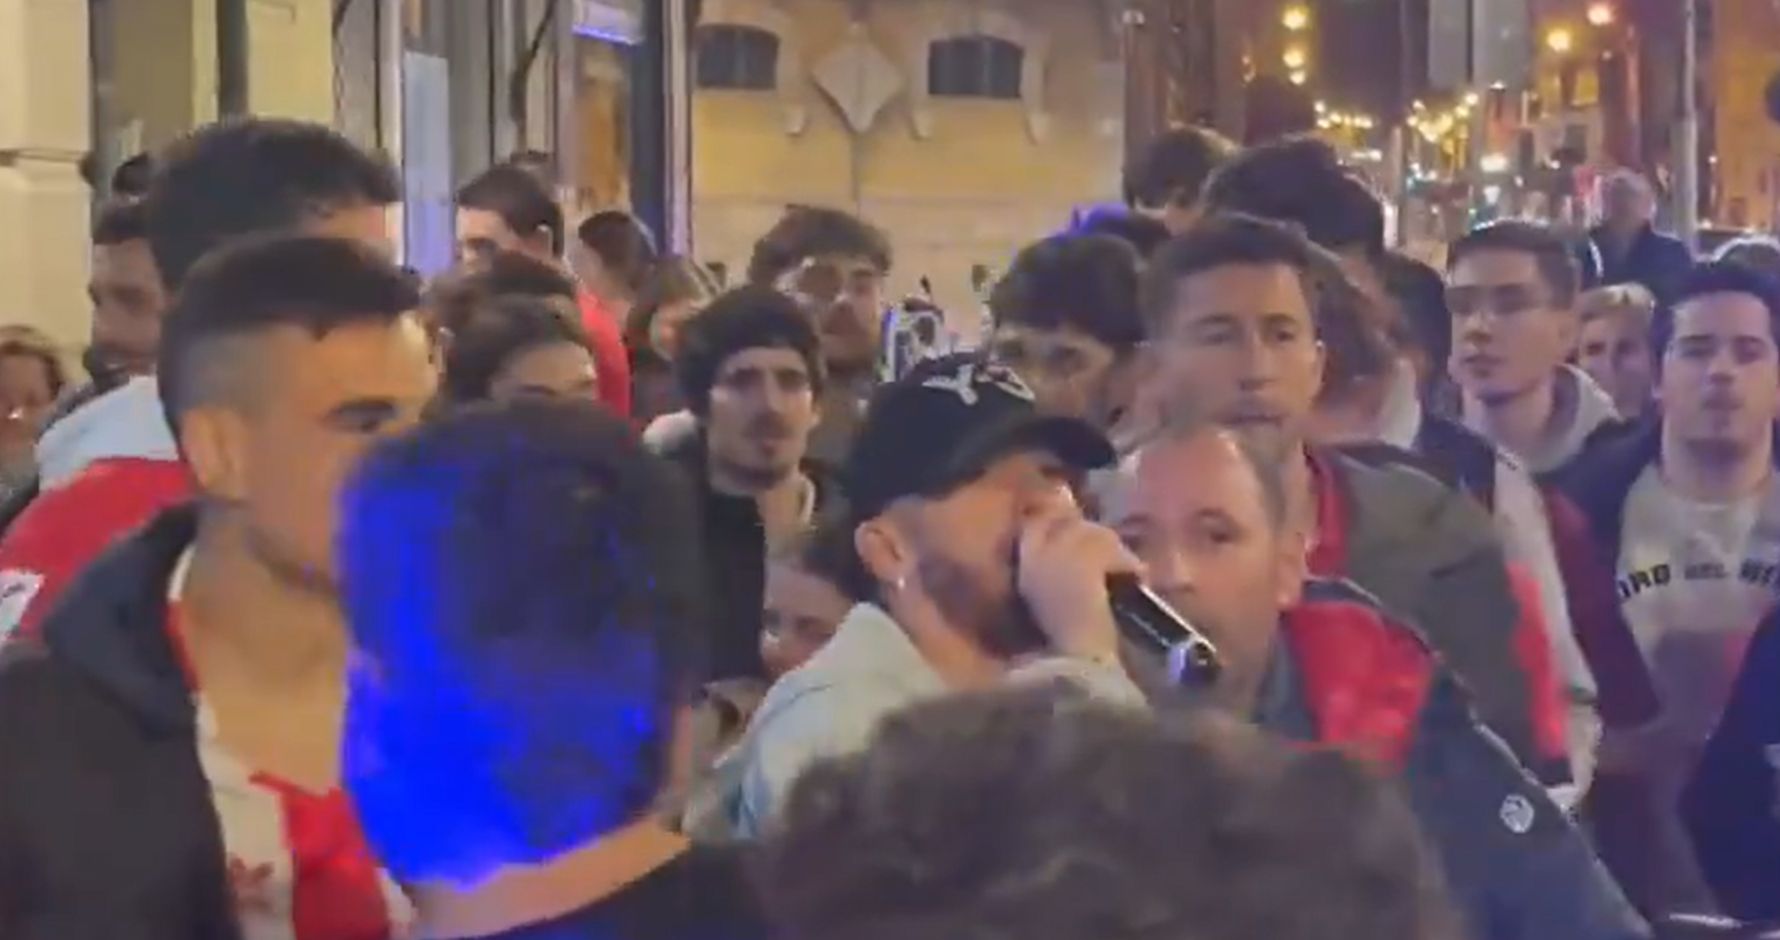 WATCH: Incredible scenes as Athletic Club squad take party to streets to celebrate Copa del Rey with fans